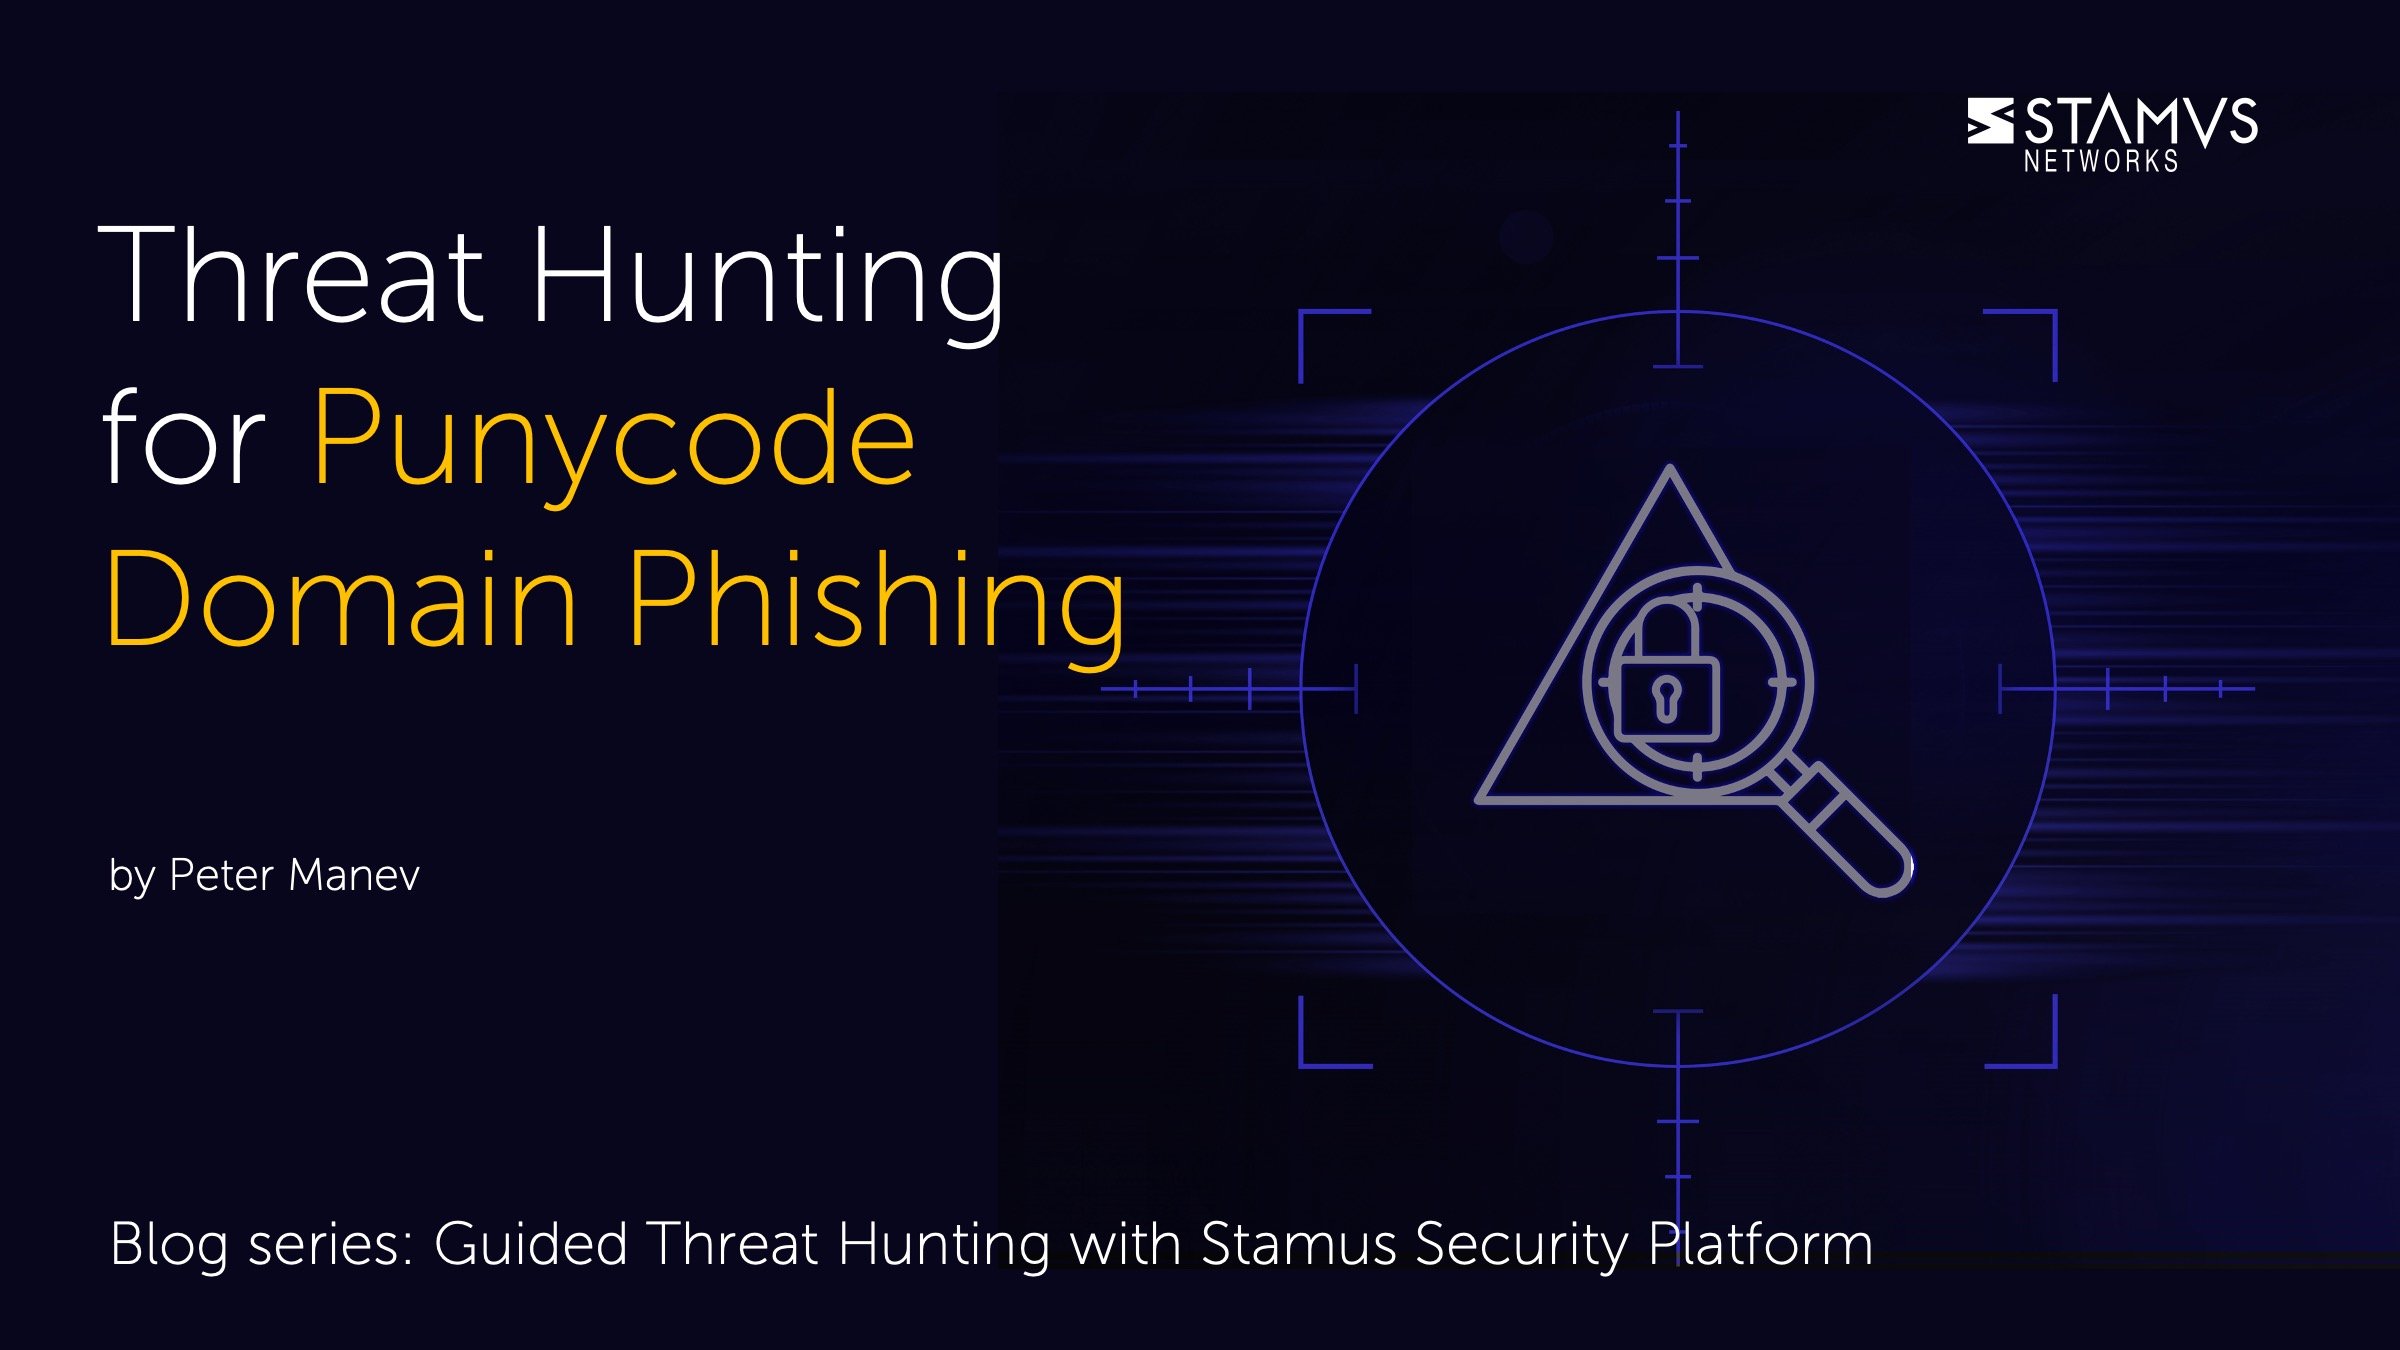 Threat Hunting for Punycode Domain Phishing with Stamus Security Platform by Peter Manev